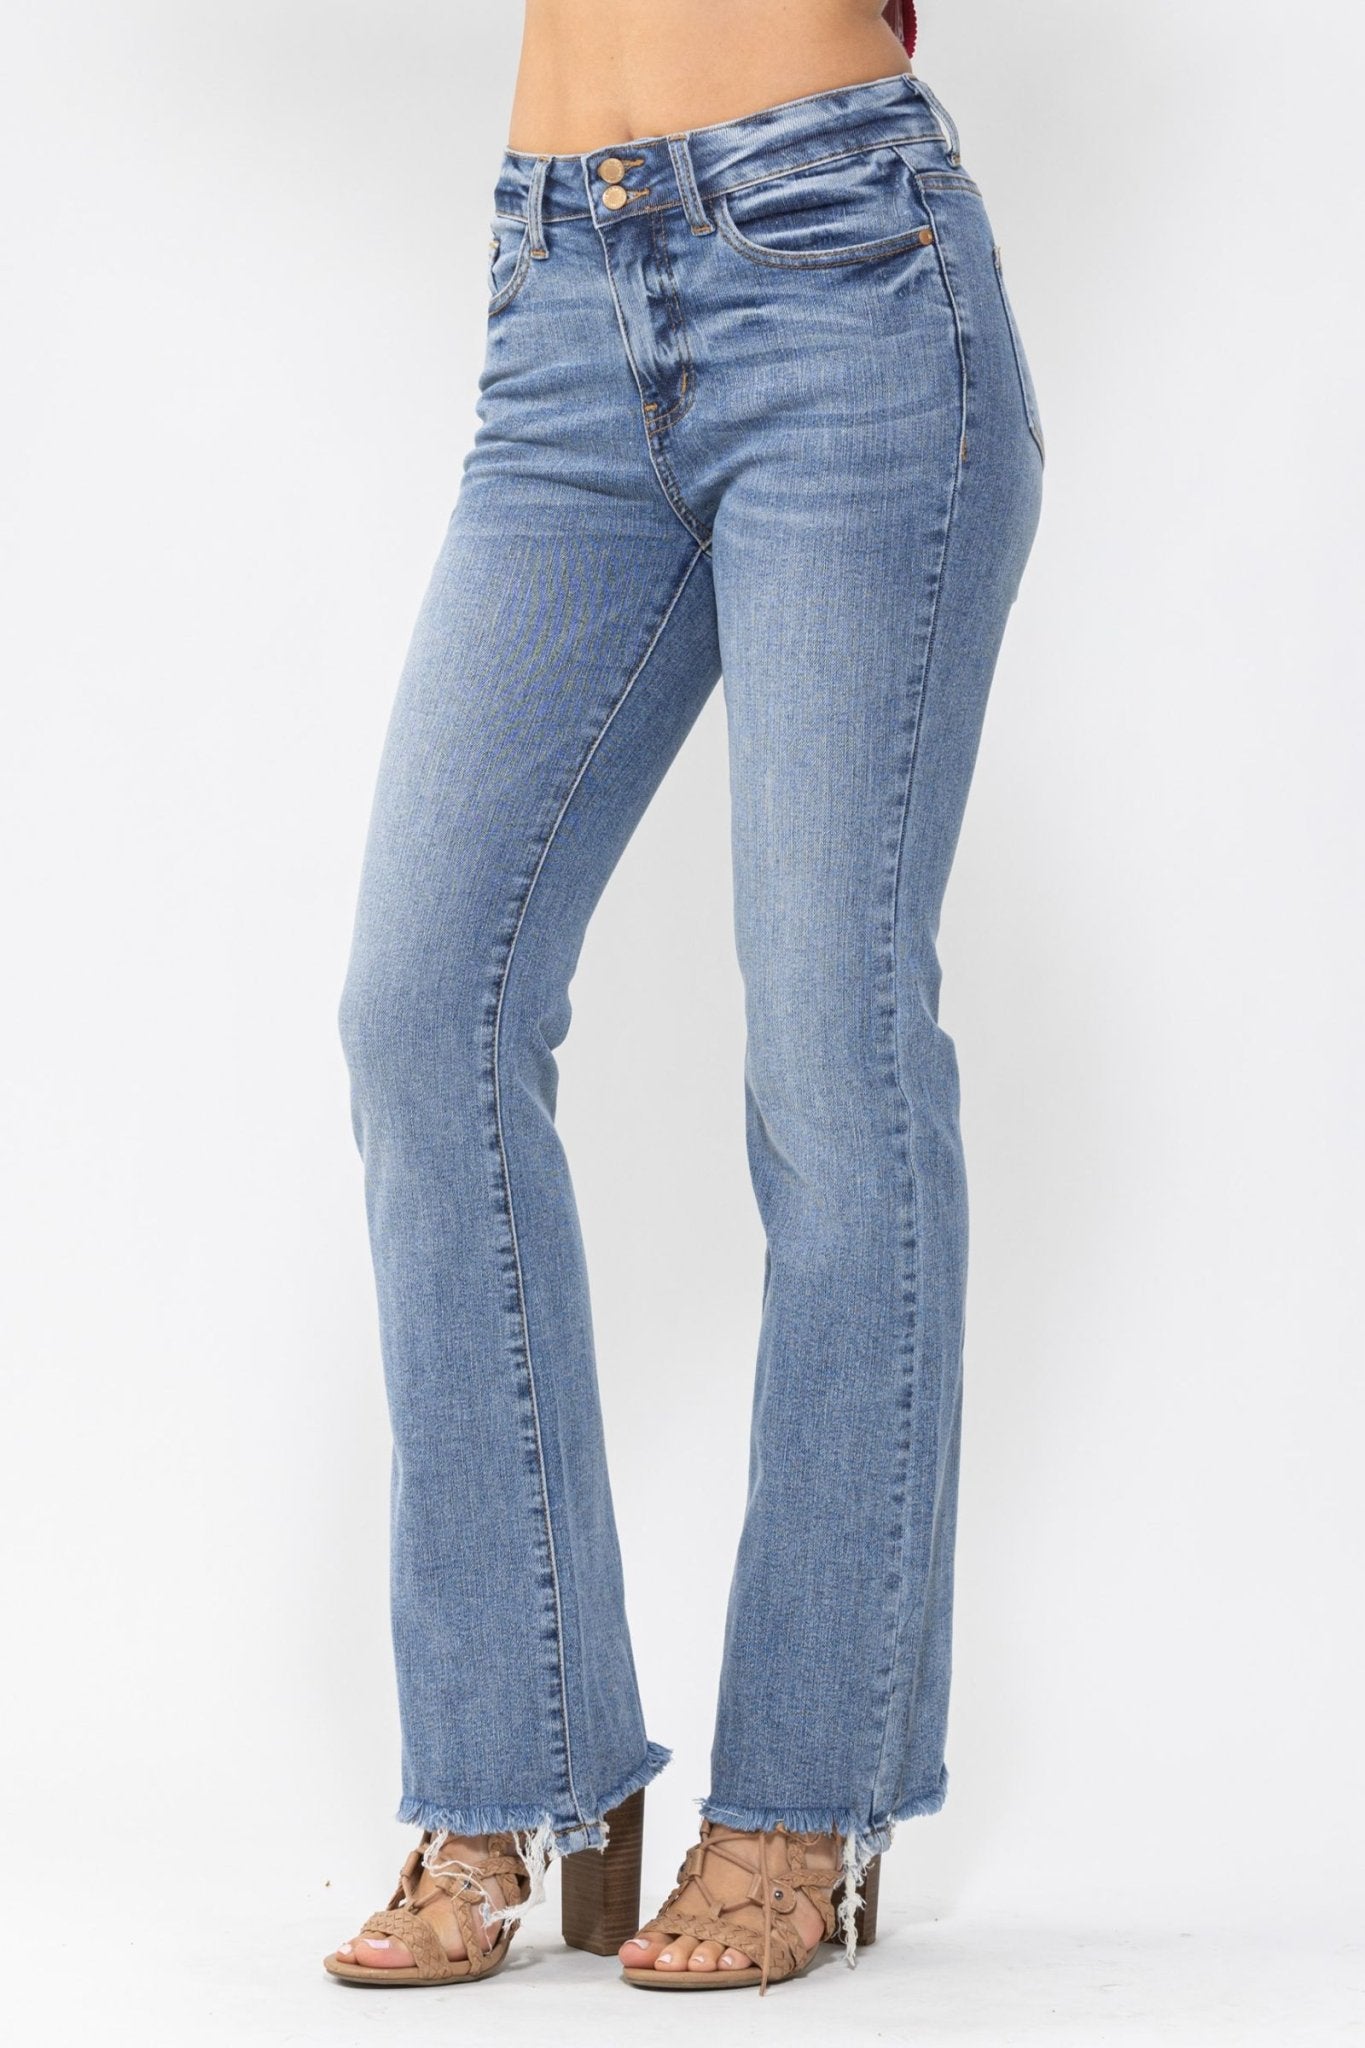 Shania Bootcut Double Button Jeans | 88140 | Judy Blue - Lavender Hills BeautyJudy Blue88140REG-MD-1(25)